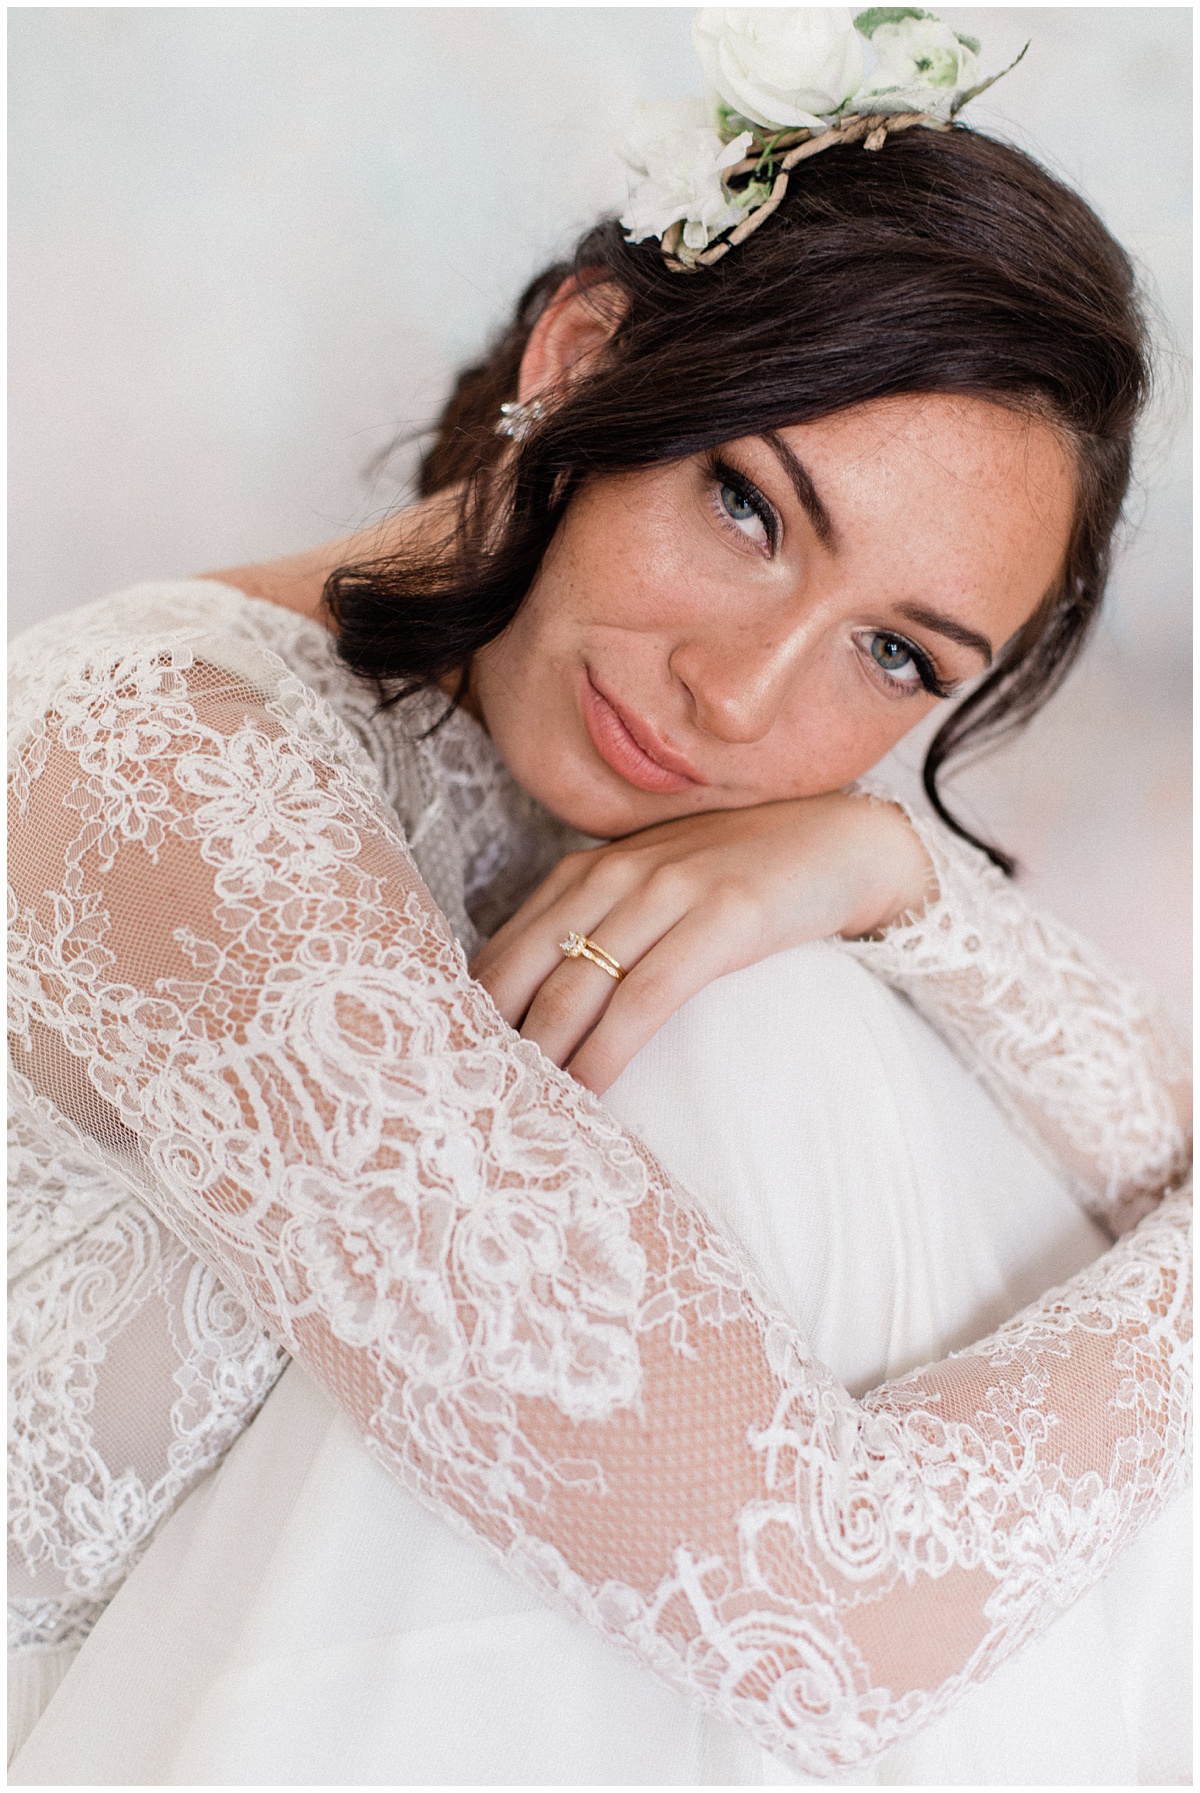 beautiful freckled bride rests her cheek against her knees and shows off her floral headpiece. Images by Comfort and Cashmere. Dear Bride Series about wedding planning.